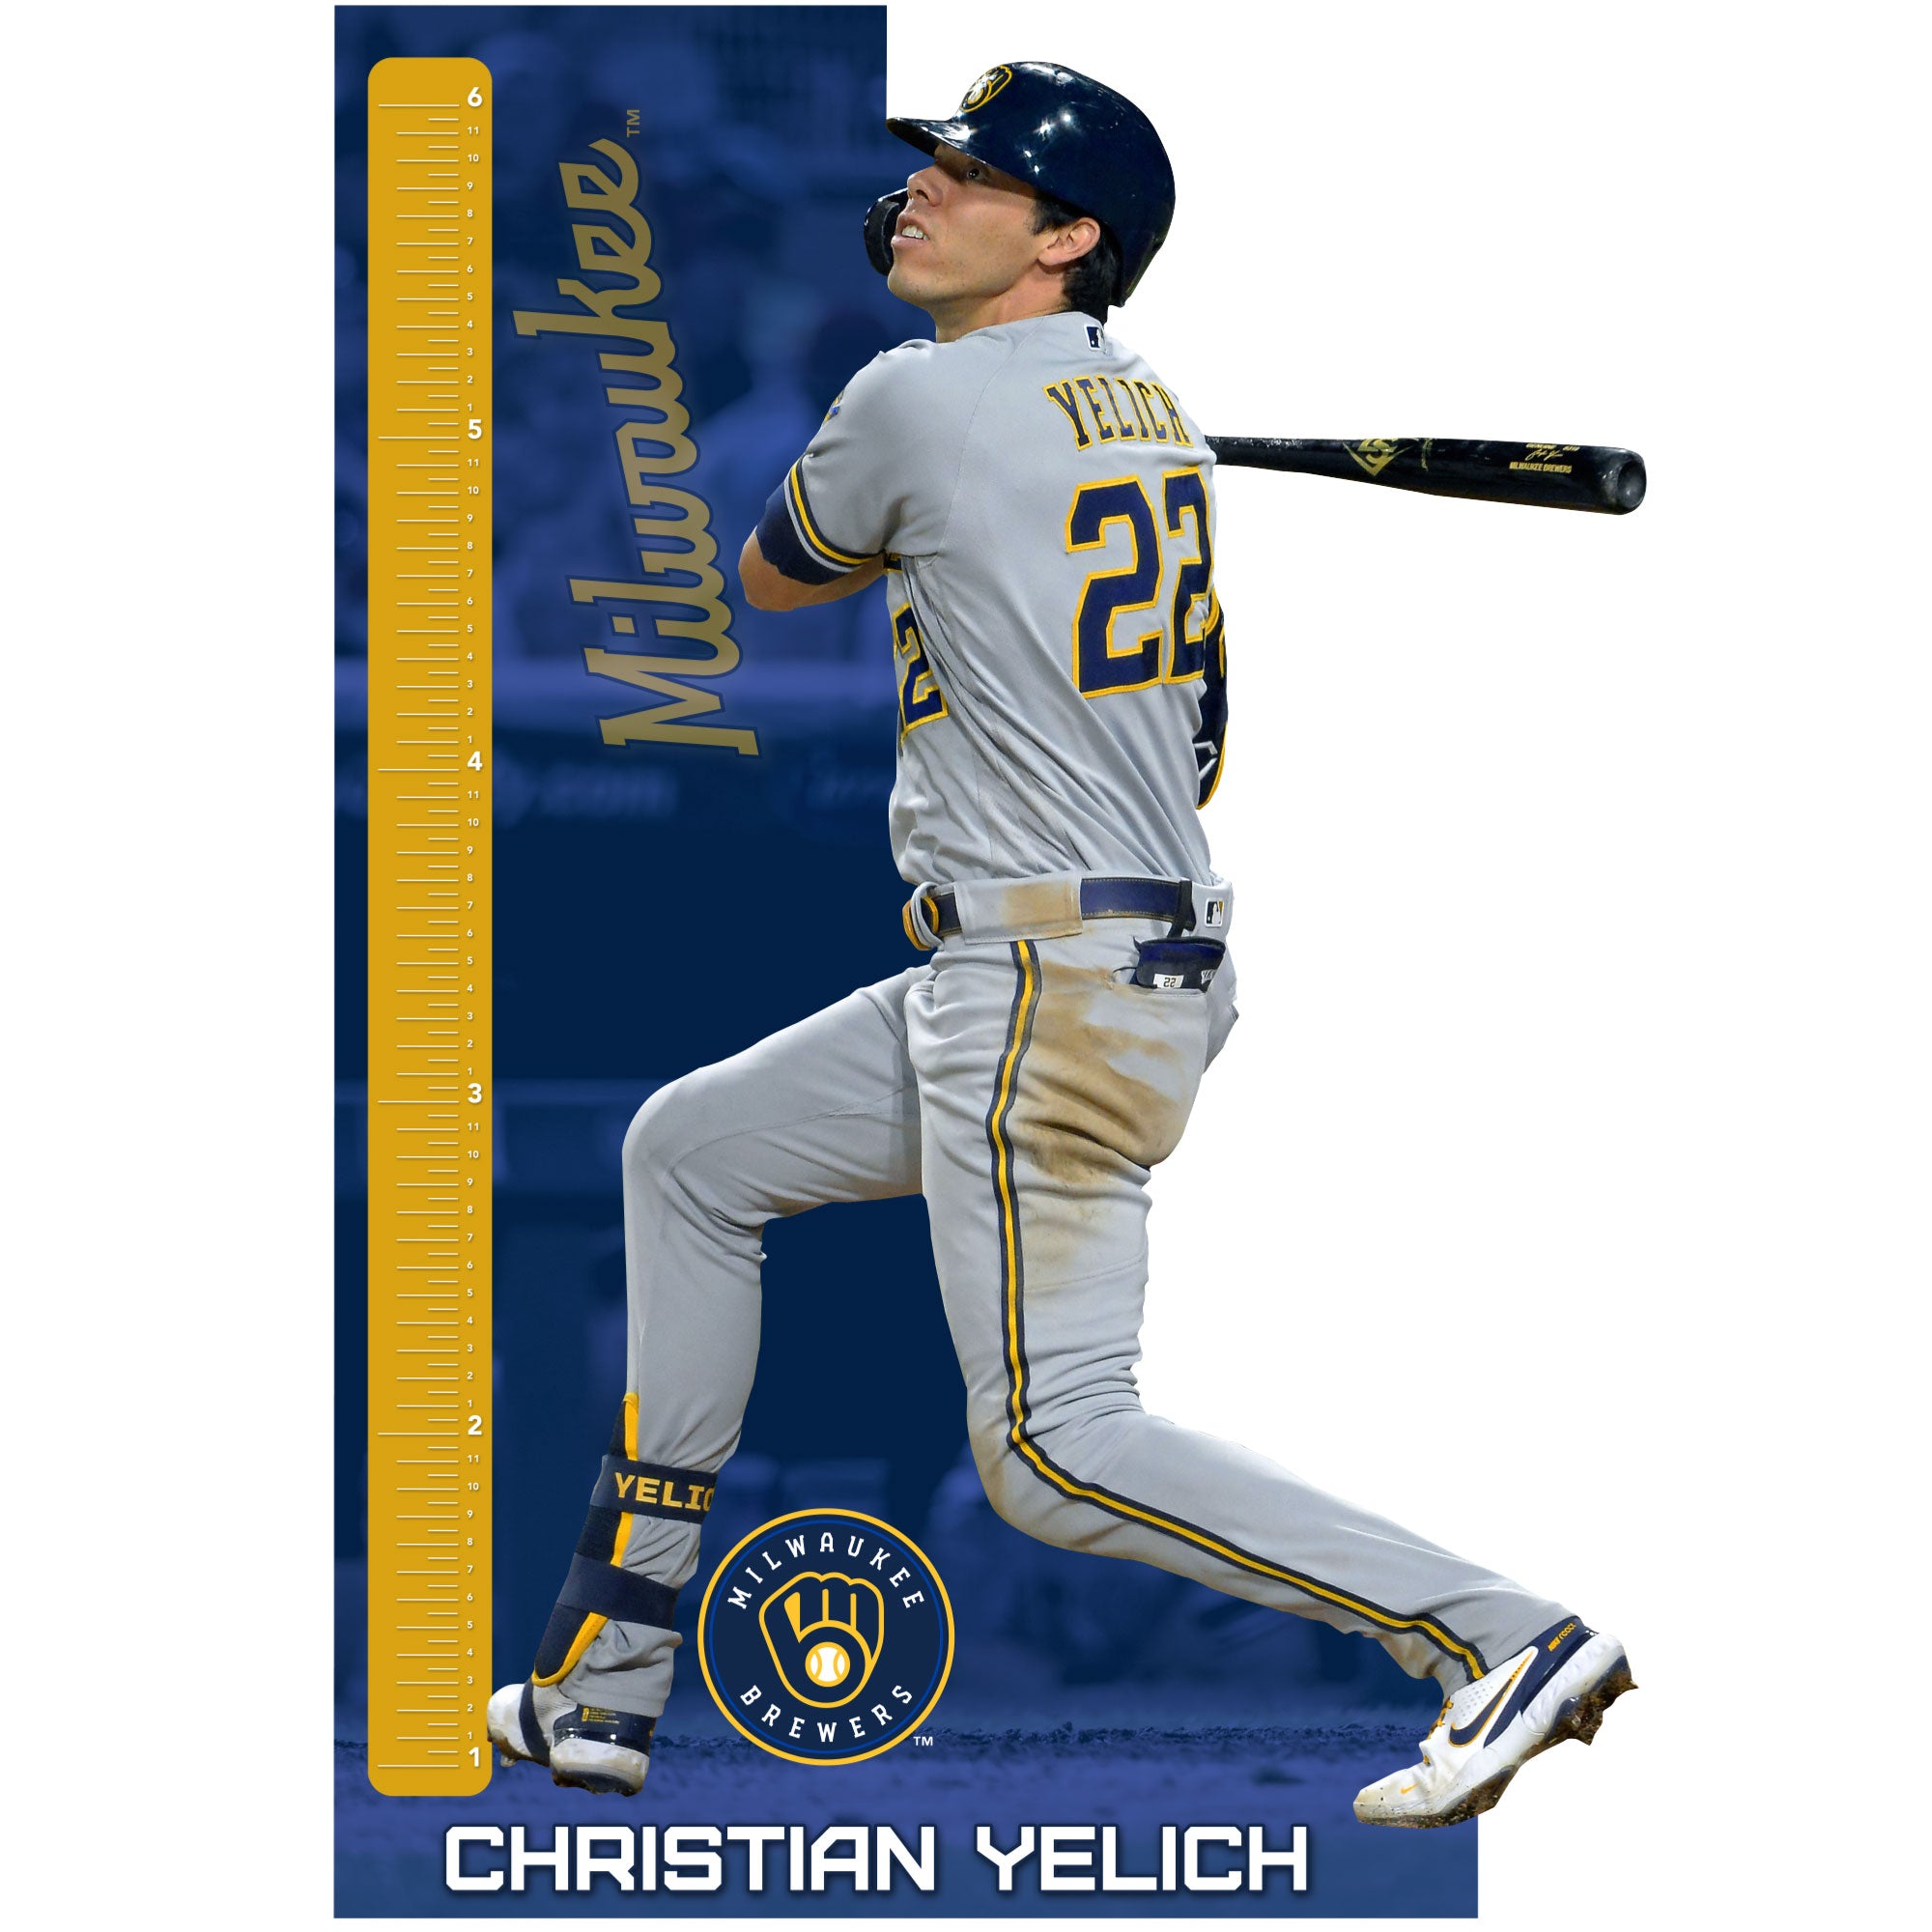 Christian Yelich Milwaukee Brewers Deluxe Framed Autographed